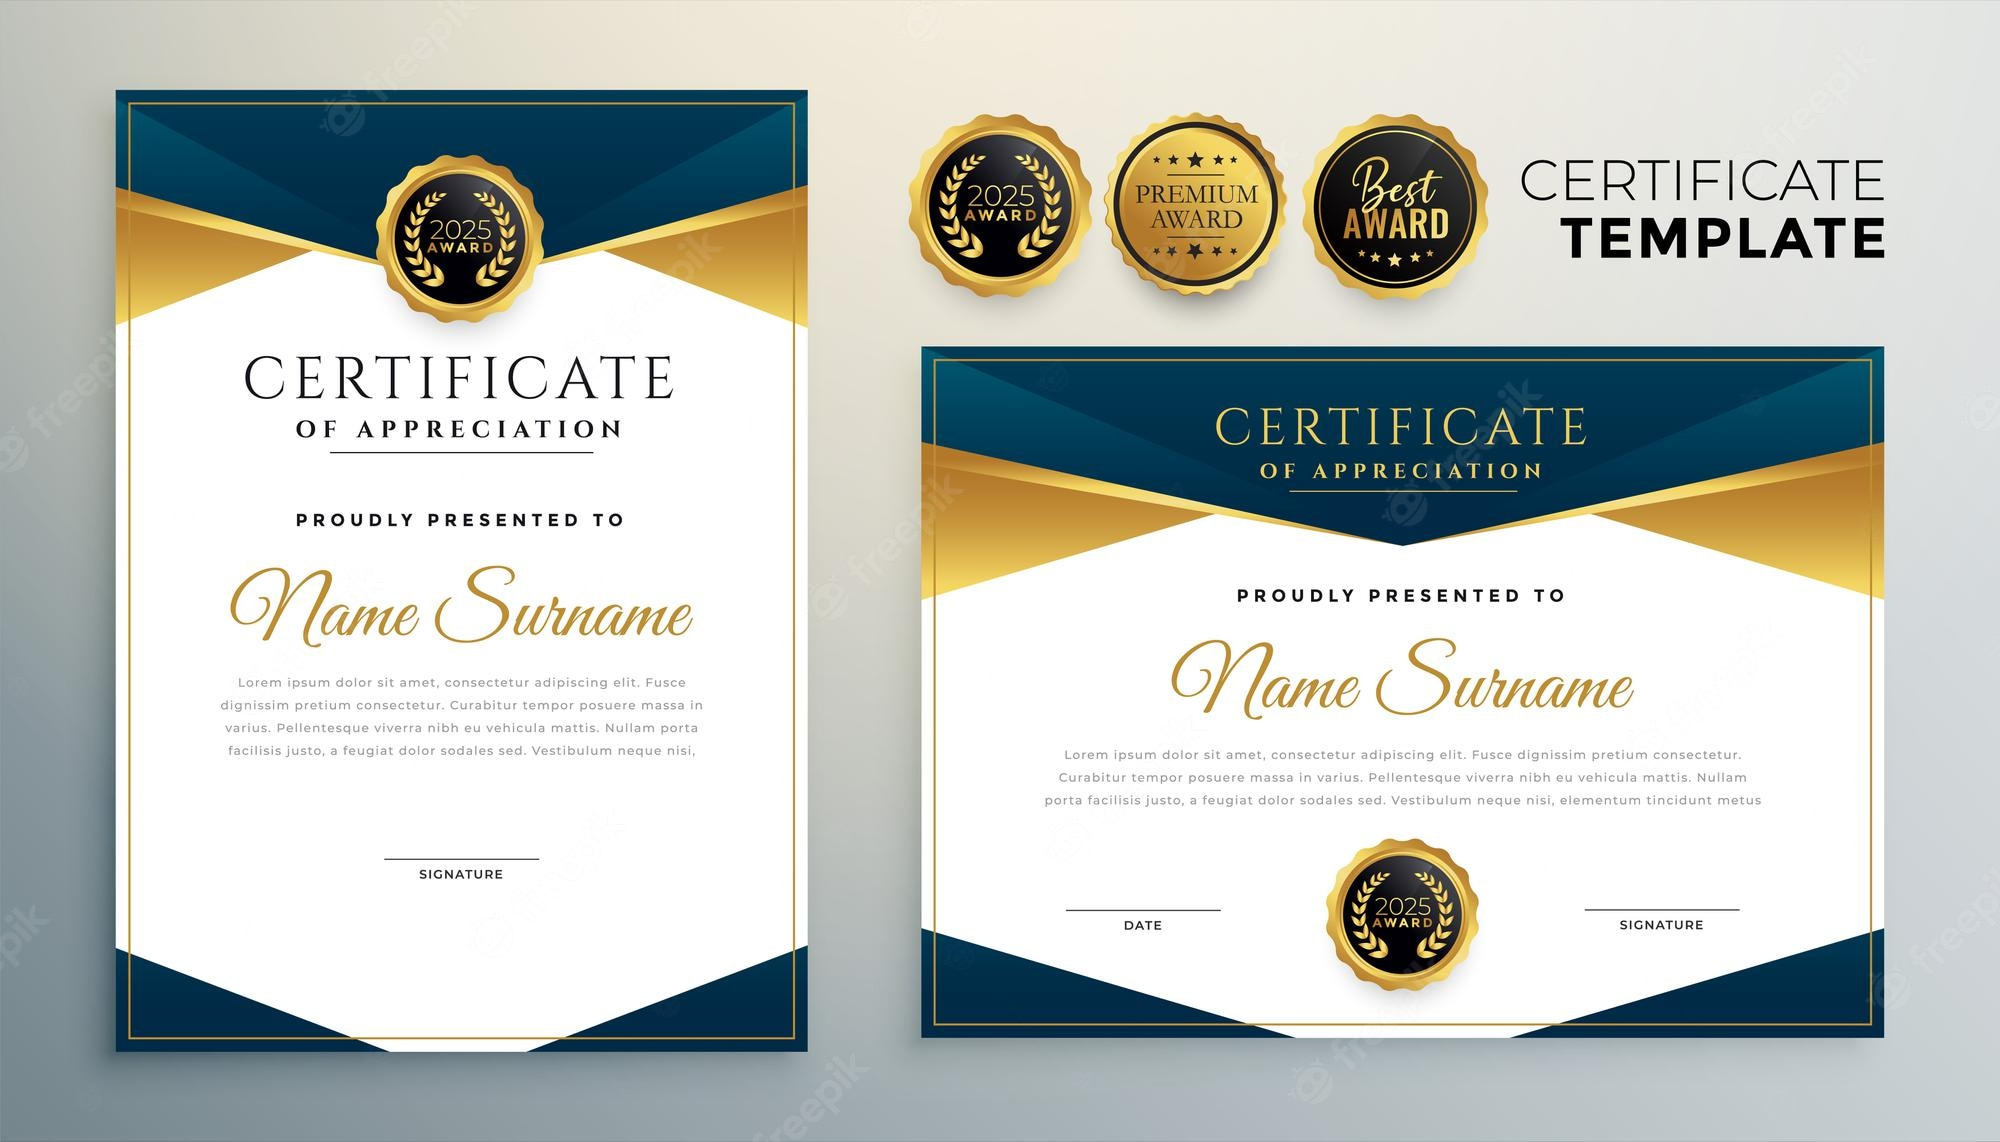 Certificate Of Recognition Images  Free Vectors, Stock Photos & PSD With Free Template For Certificate Of Recognition